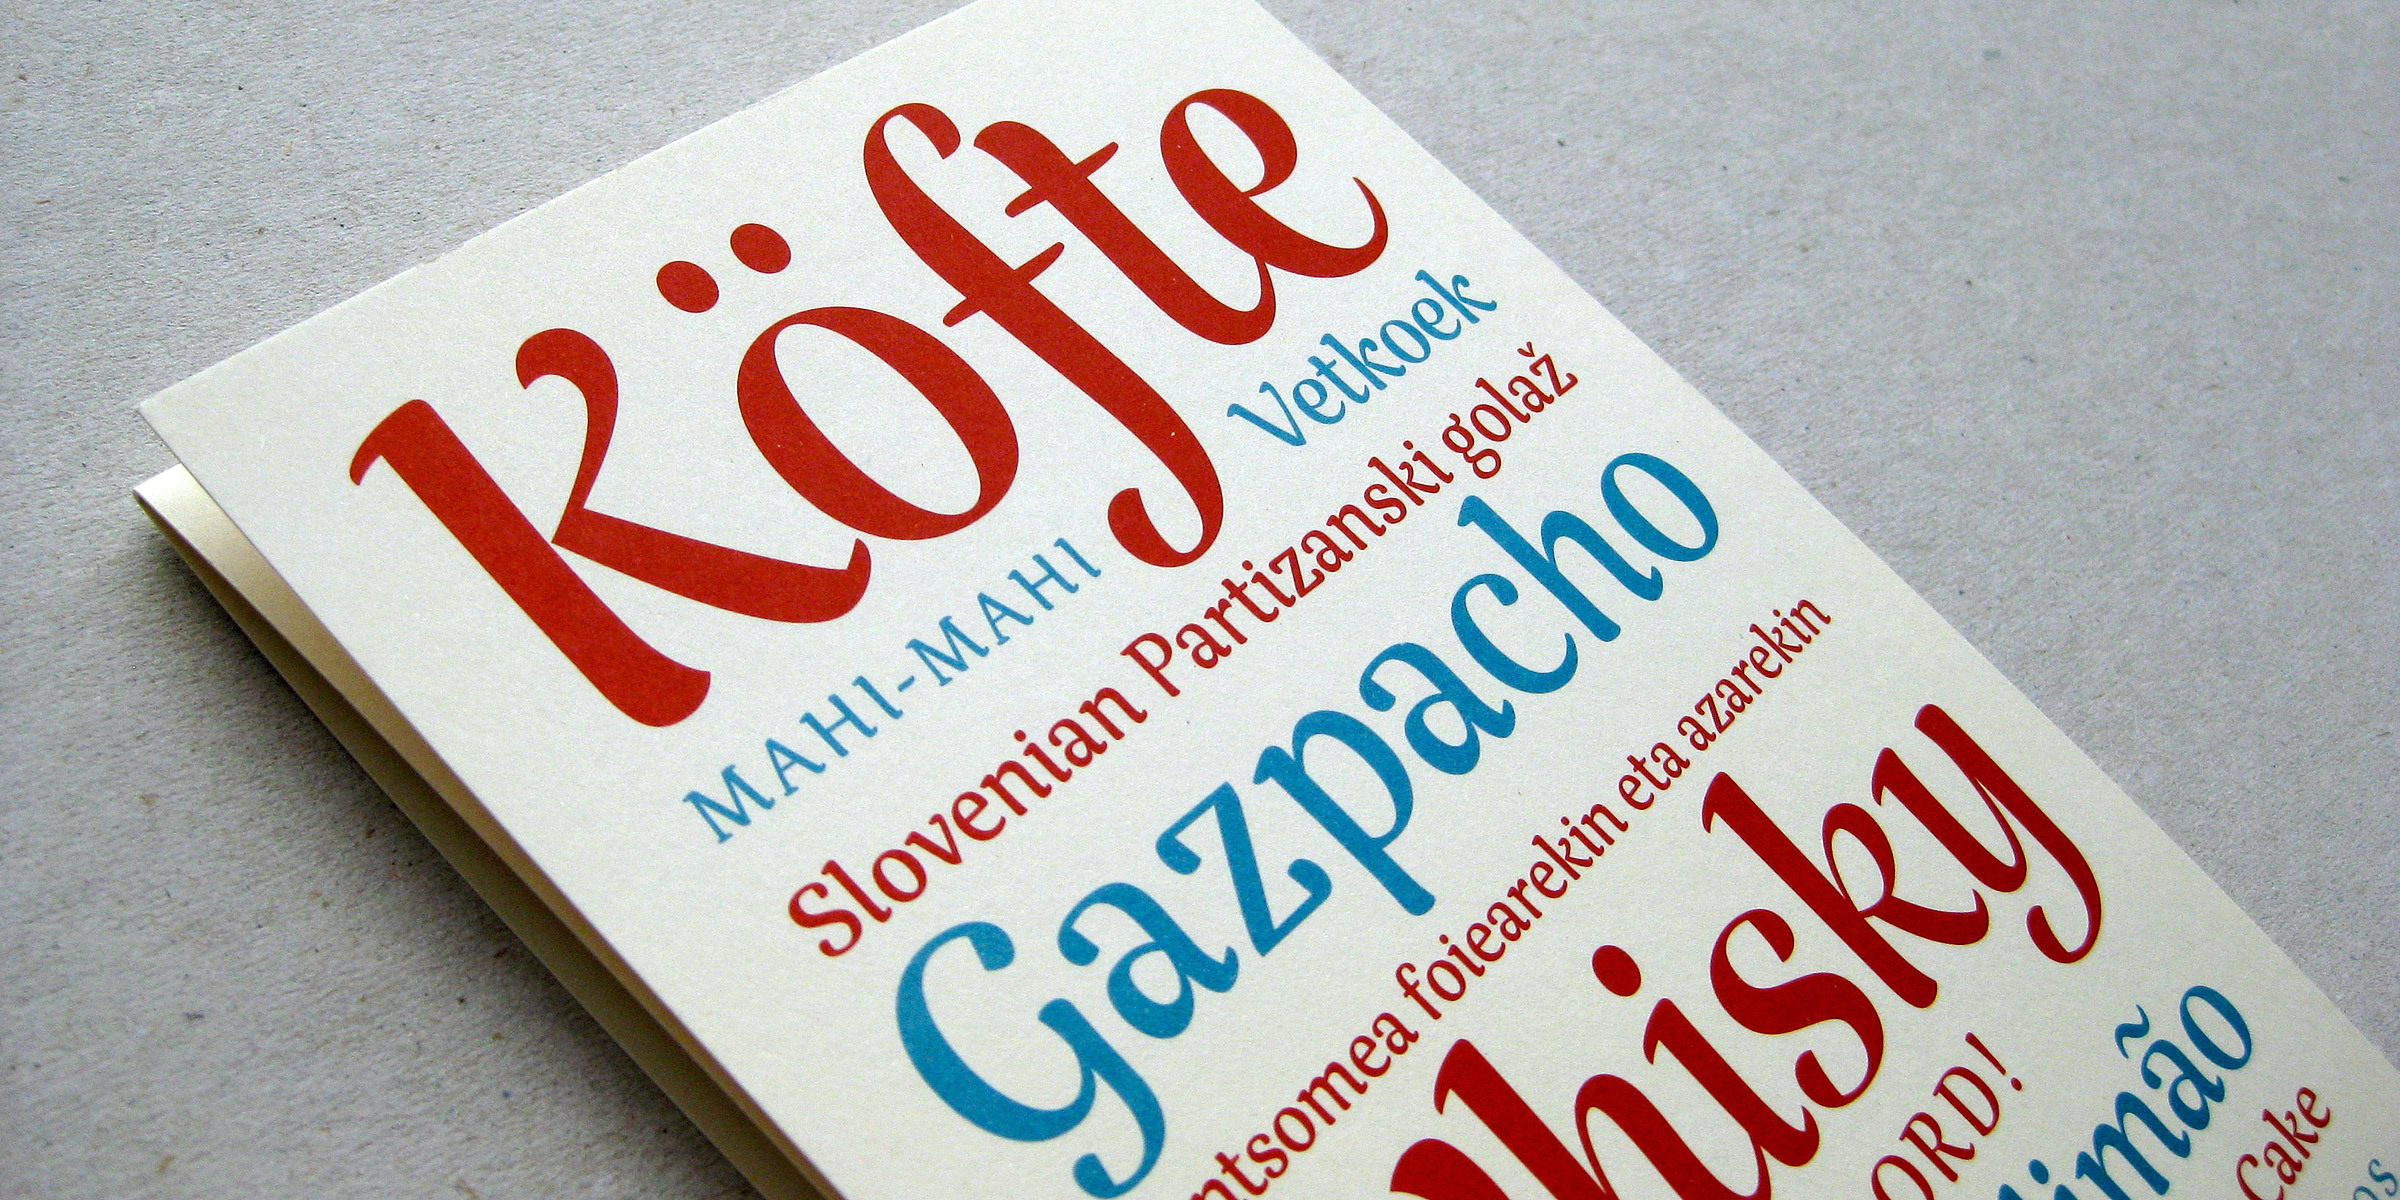 Rumba consists of three variants – Small for texts, Large for headlines and Extra for words with a lettering flavour. The family is based on the idea of fonts that are interrelated depending on the differences in contrast, expressiveness and use, not on the classic range of weights. Developed during Laura’s year at the Postgraduate course Type and Media at the KABK in The Hague. The typeface received a TDC 2005 Certificate of Excellence in Type Design, and awarded at ATypI Letter.2 2011.